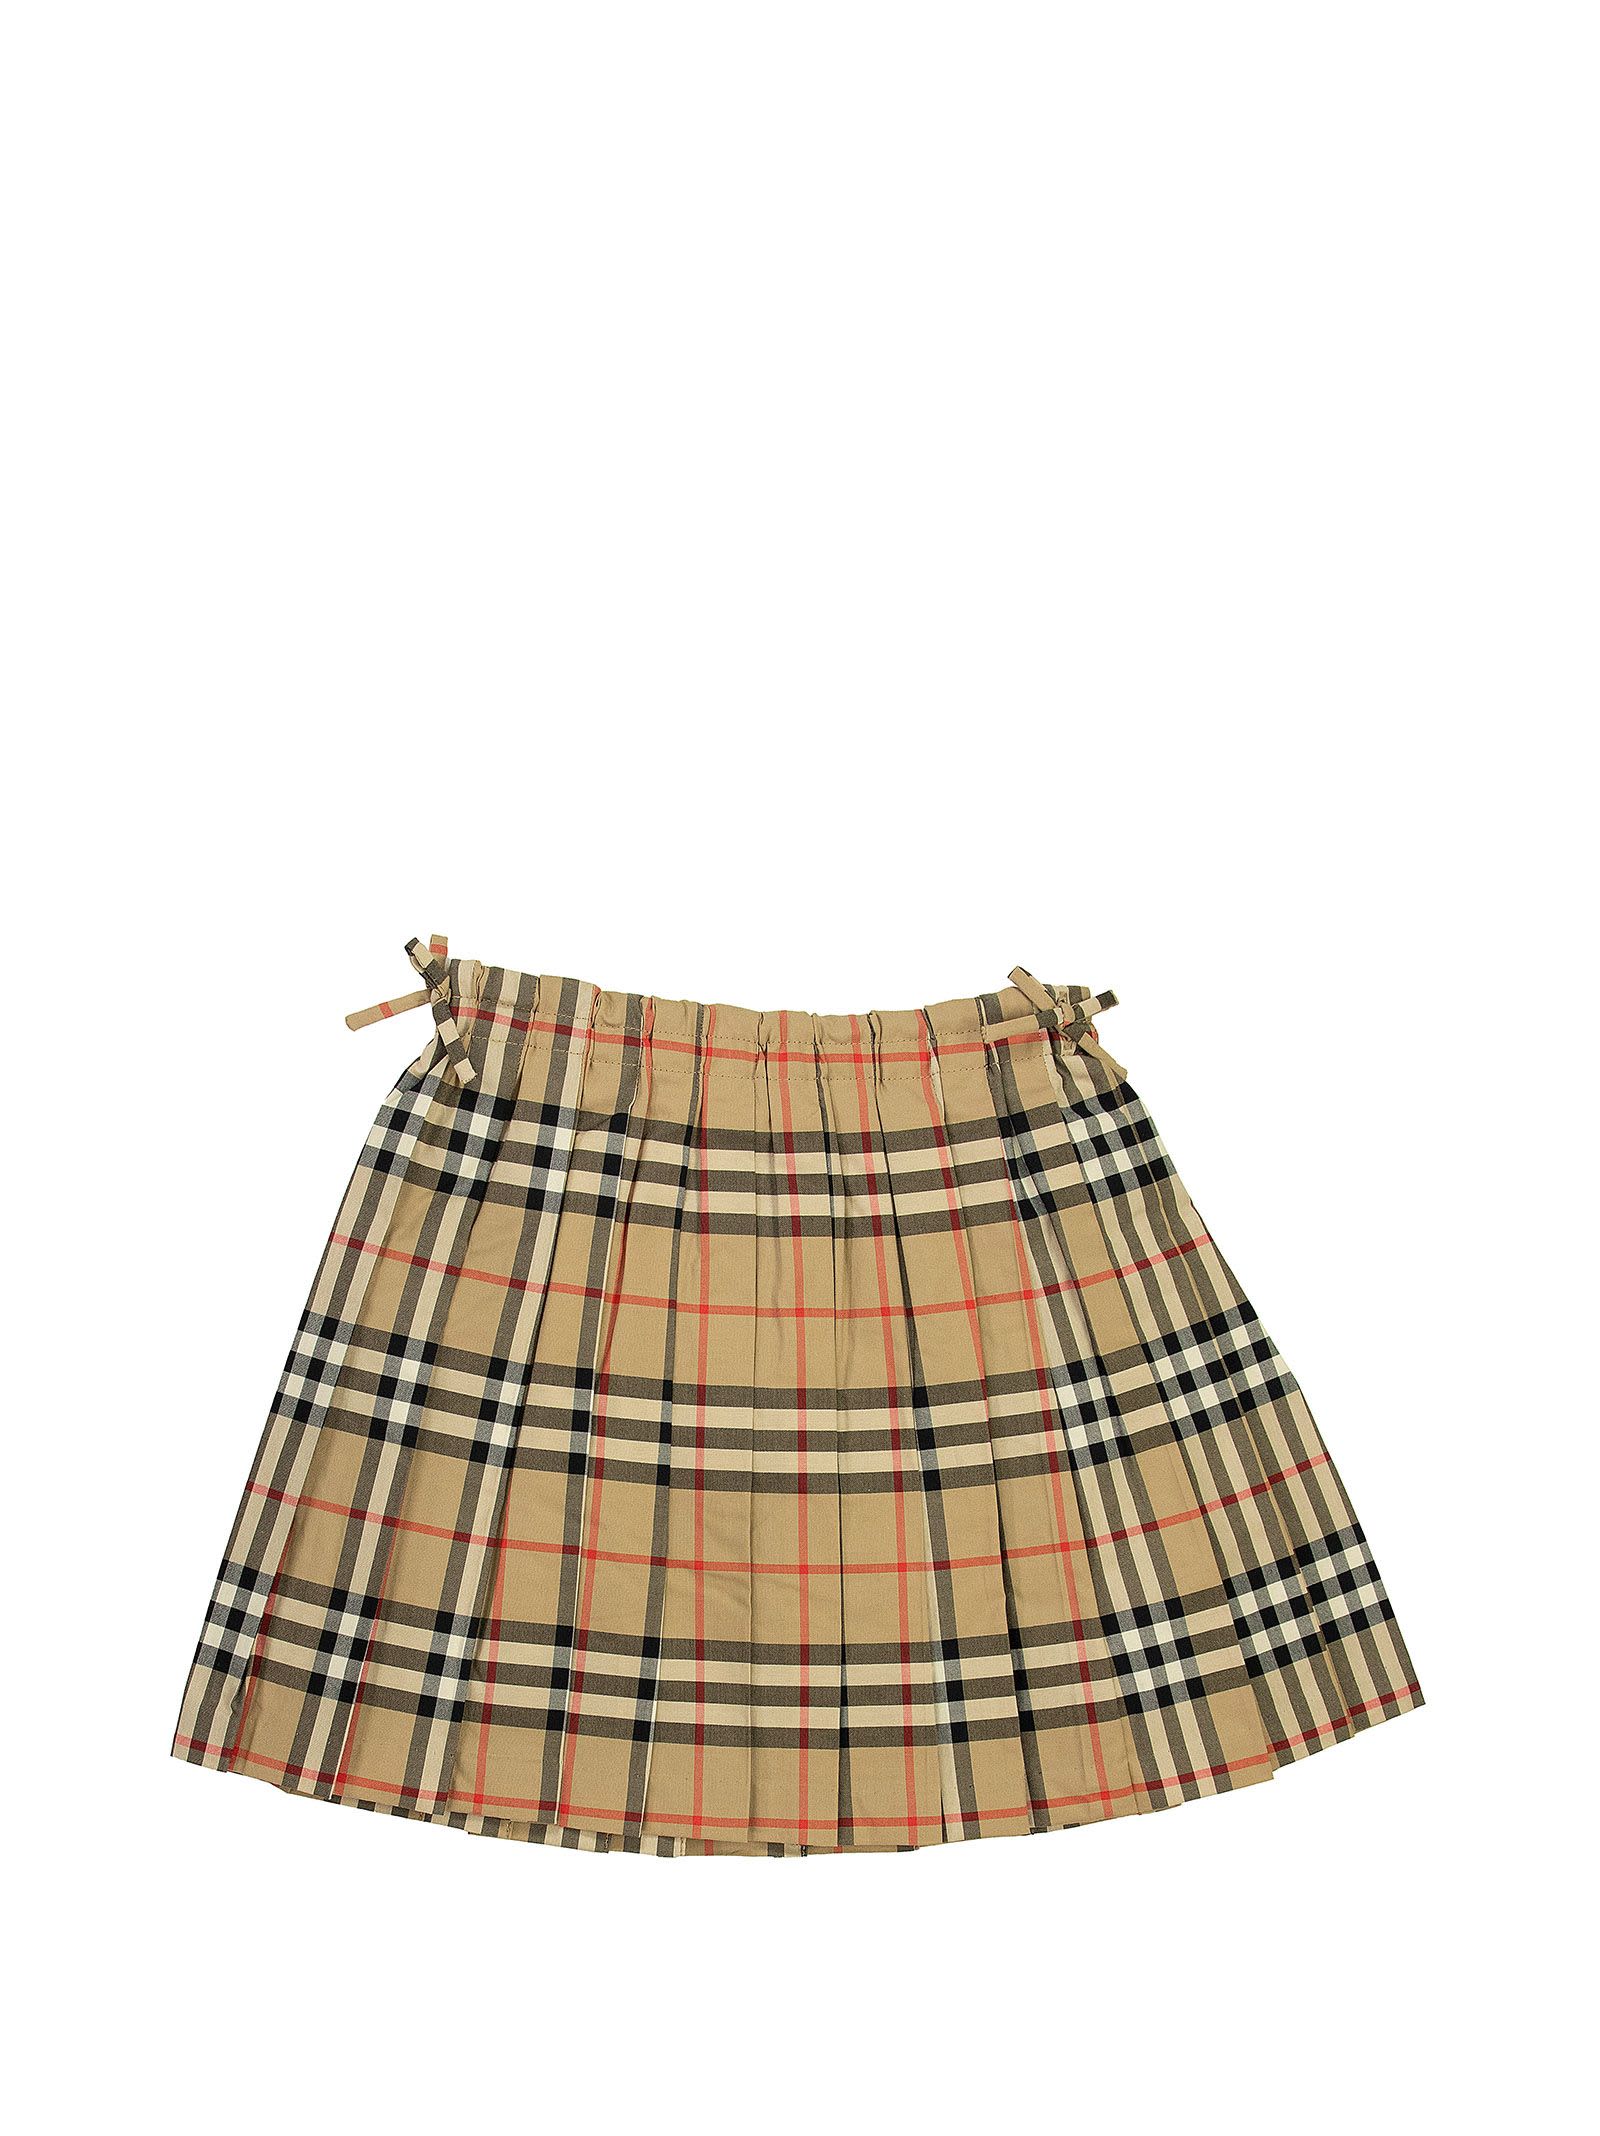 Burberry Pearly - Vintage Check Pleated Skirt